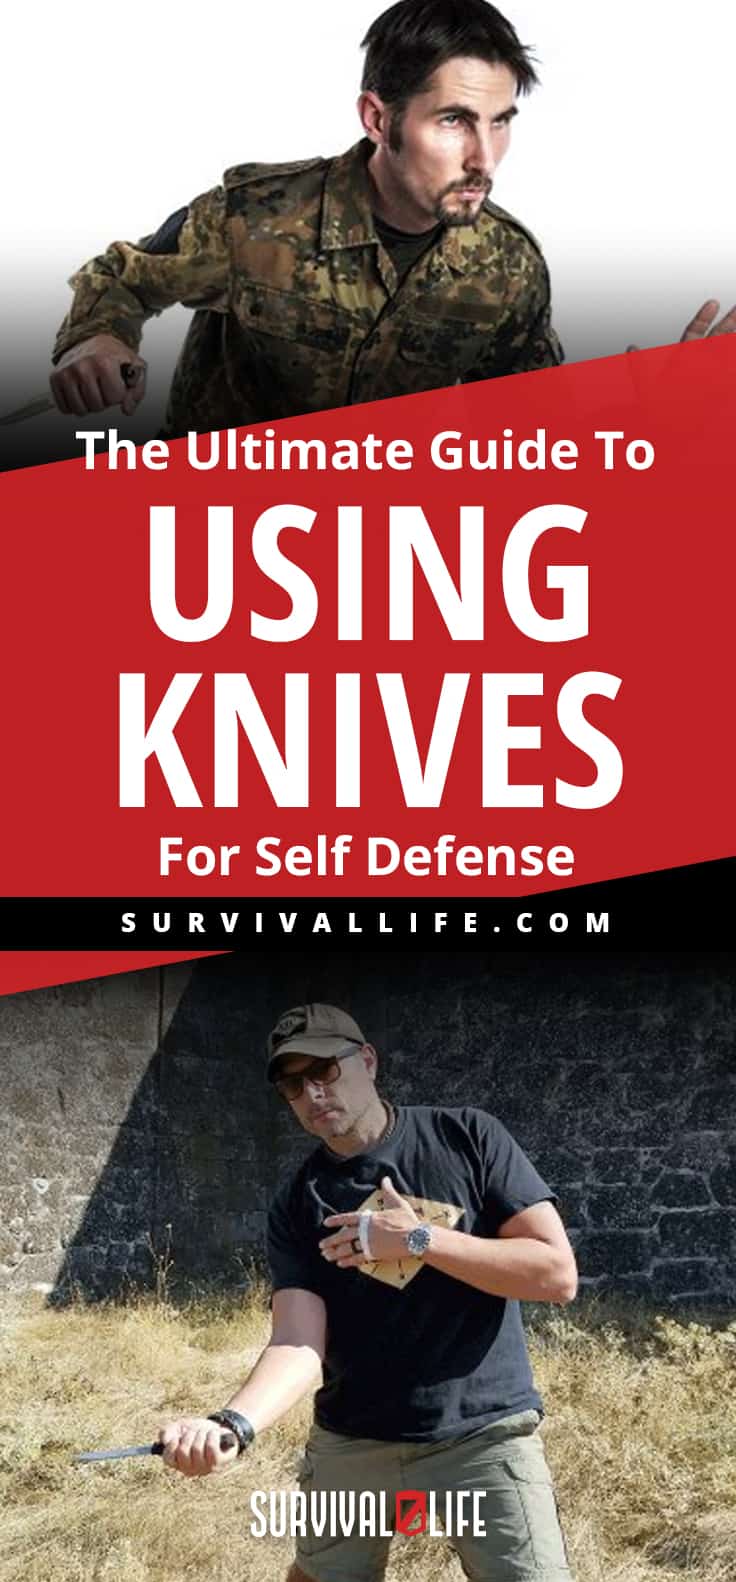 The Ultimate Guide To Using Knives For Self Defense | https://survivallife.com/using-knives-for-self-defense/